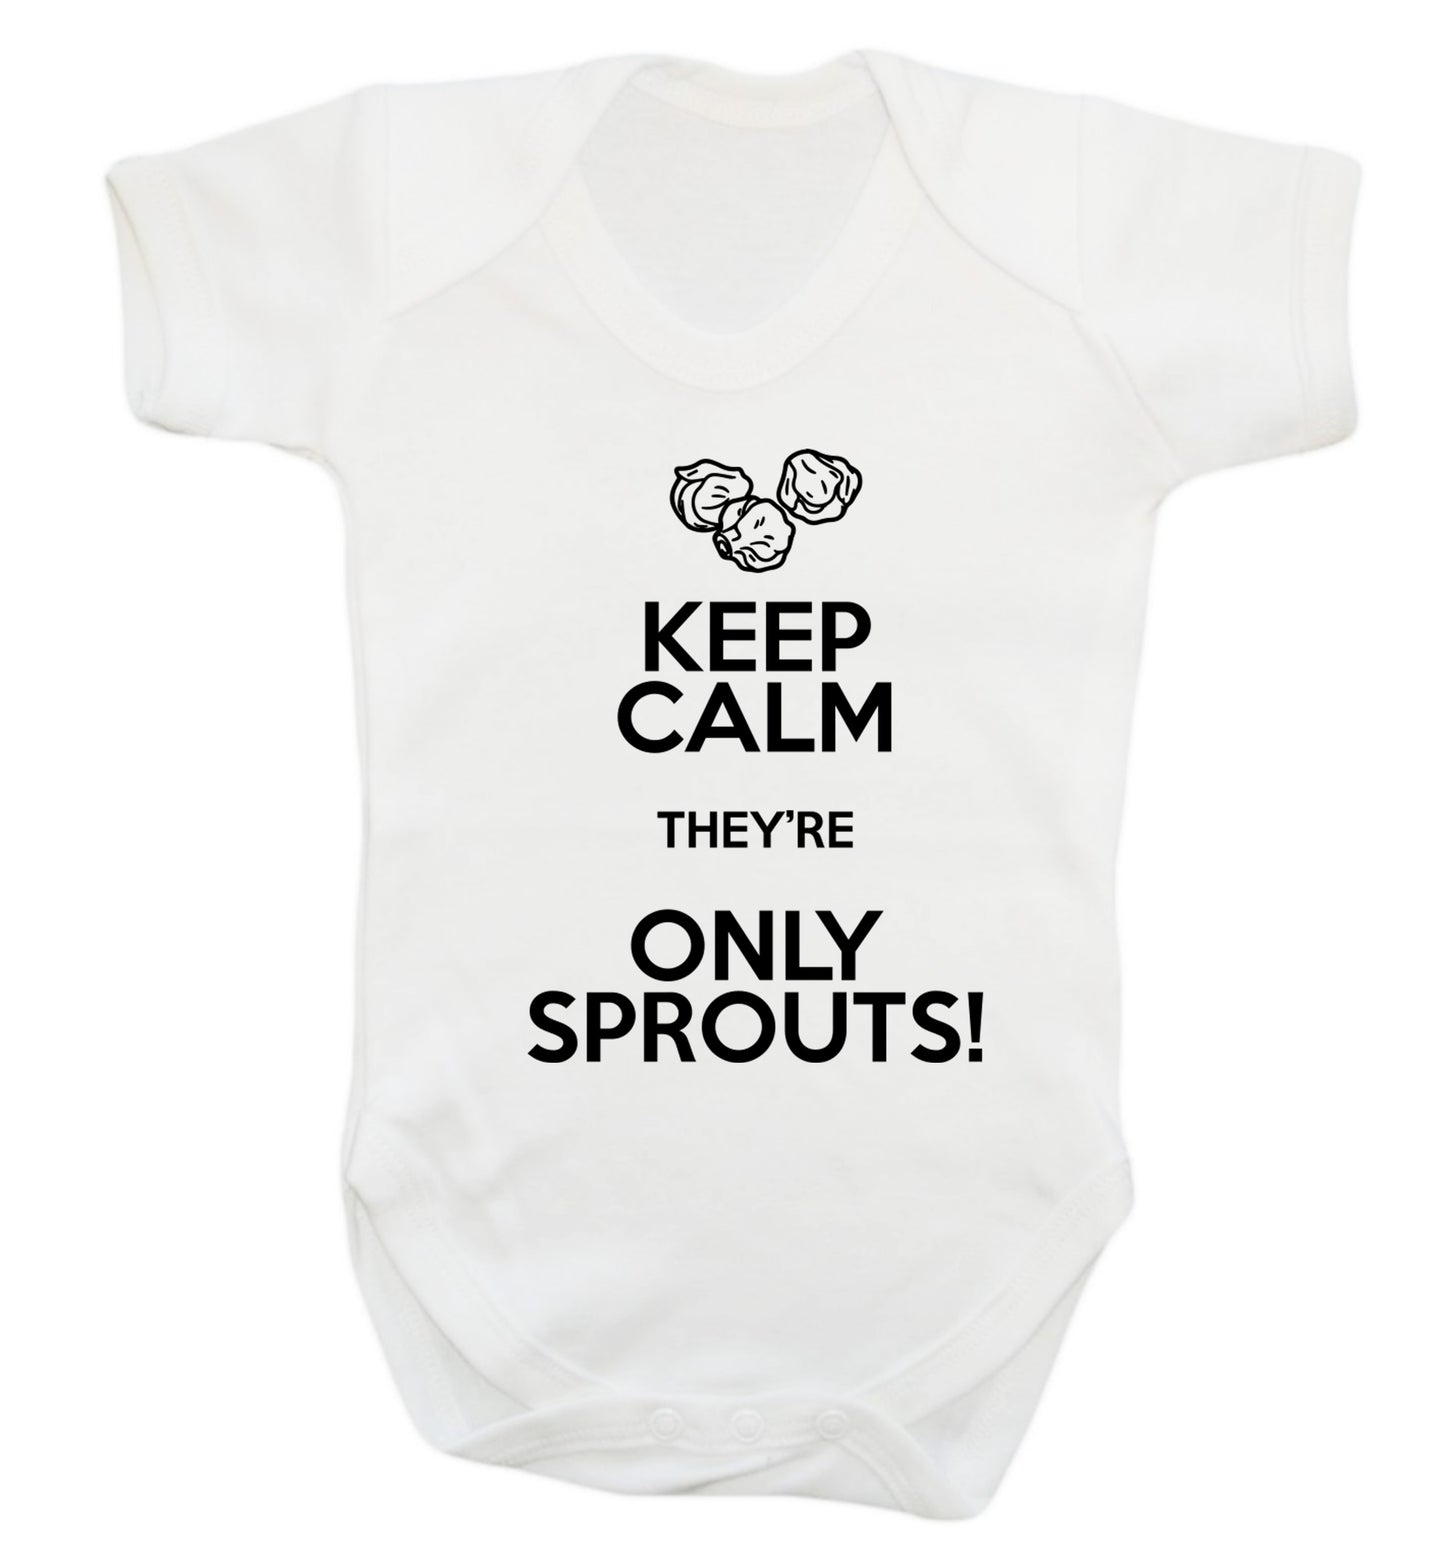 Keep calm they're only sprouts Baby Vest white 18-24 months